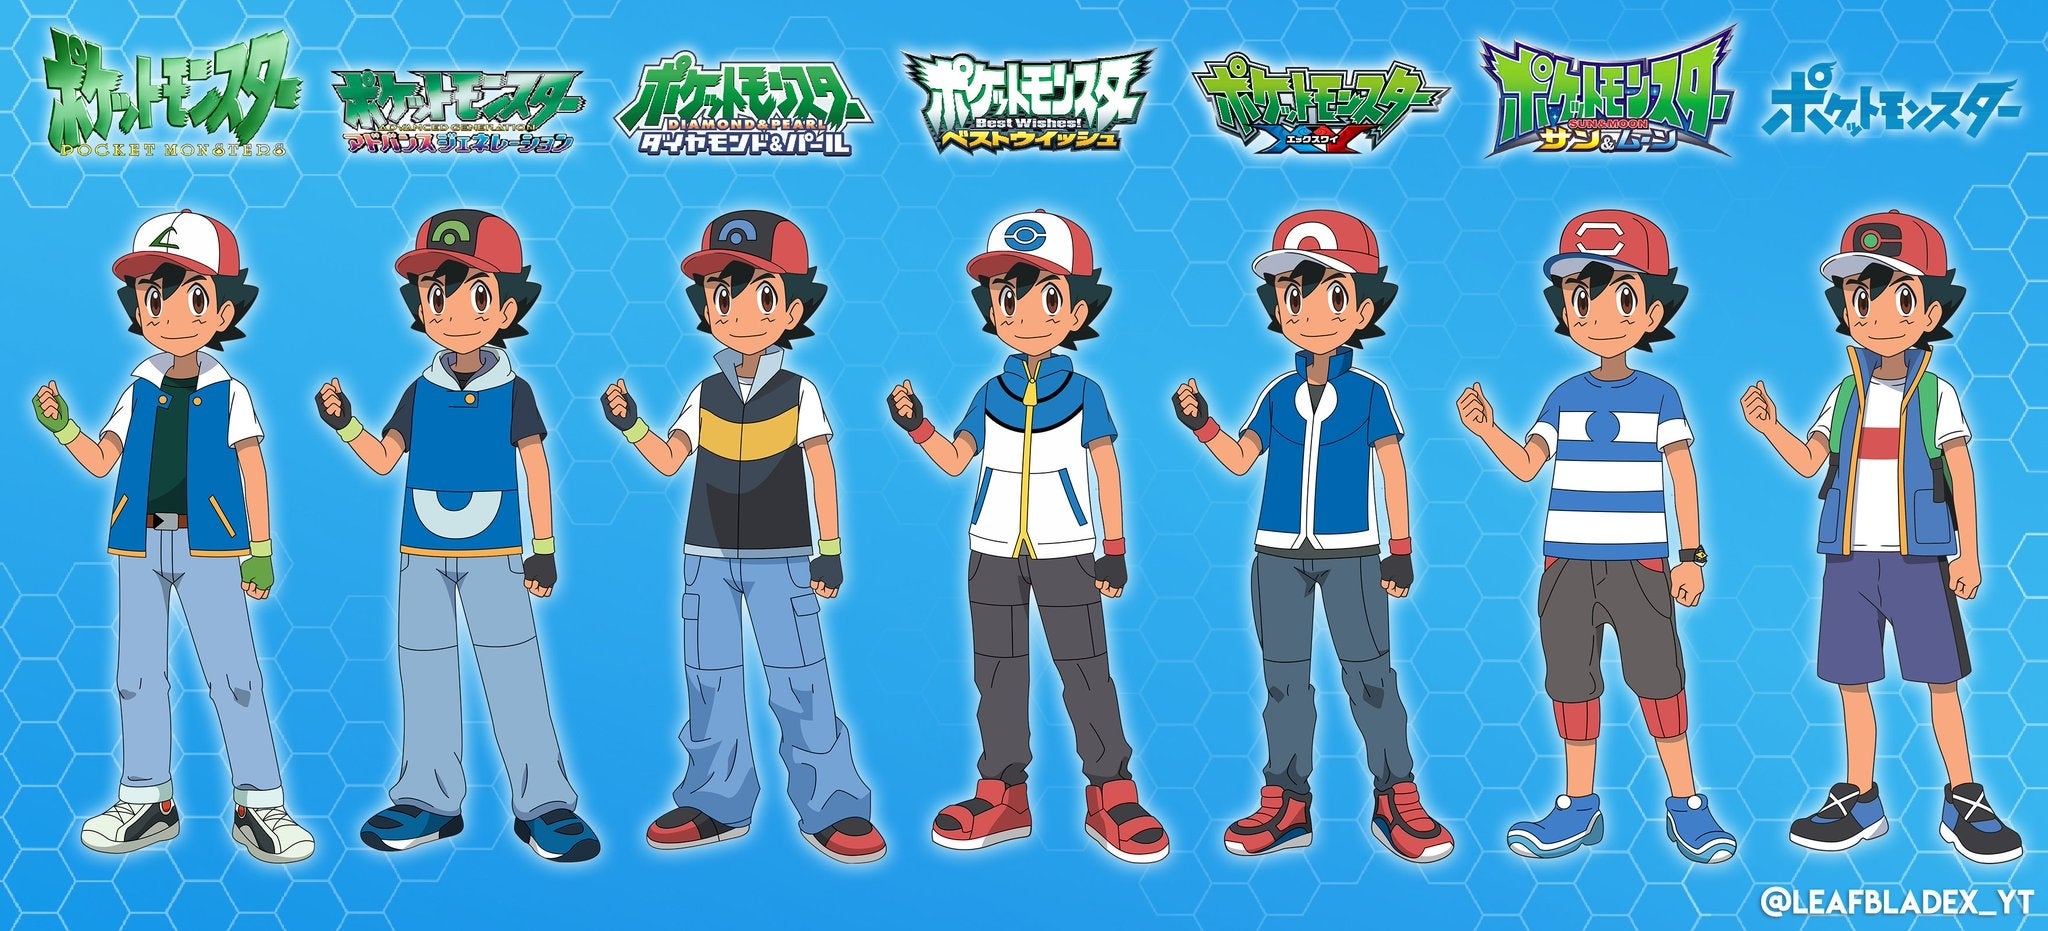 Ash's Outfits.jpg